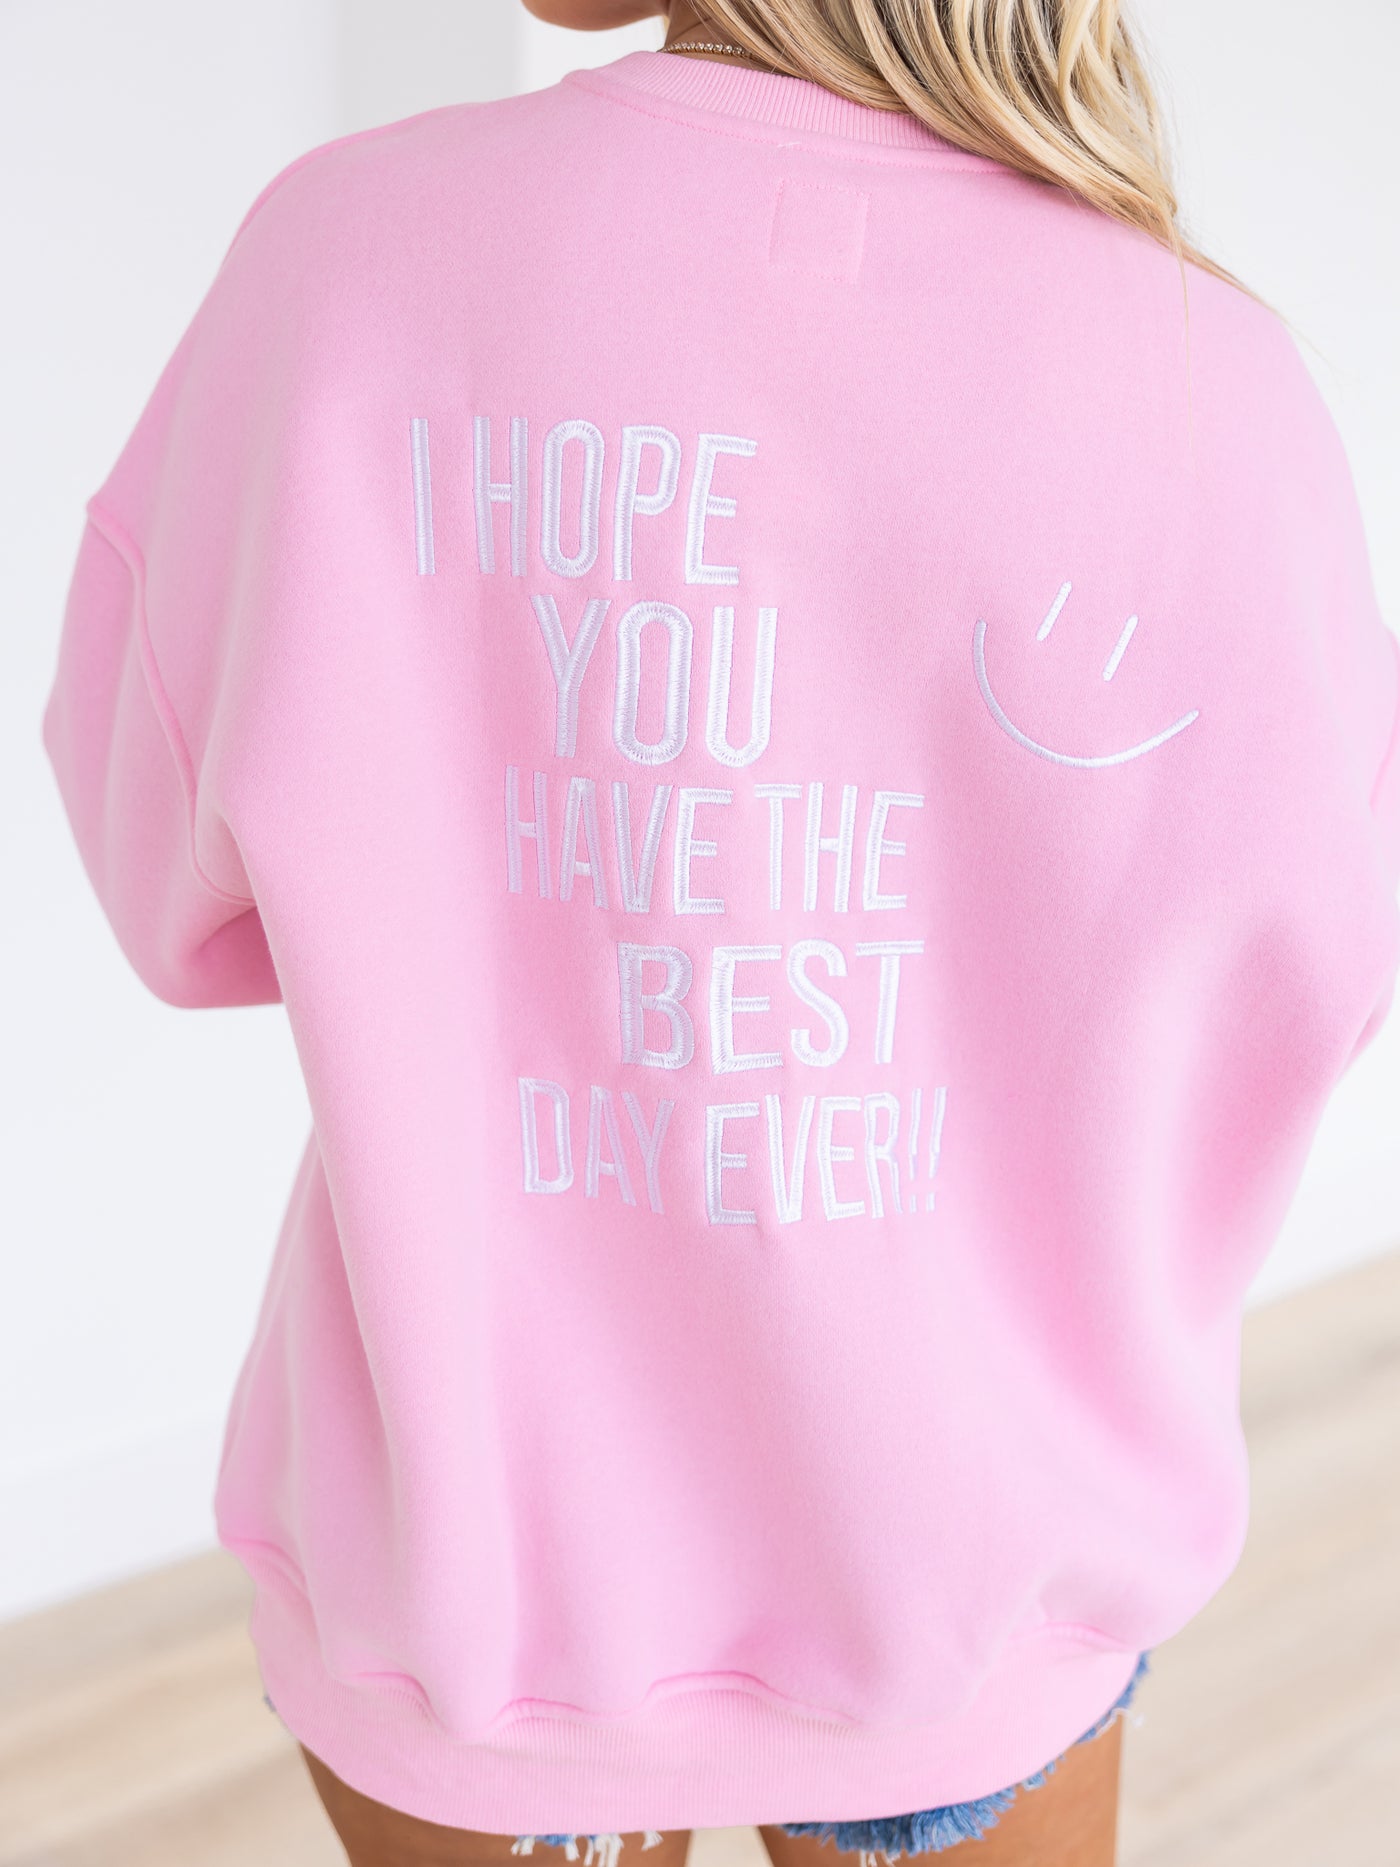 I Hope You Have the Best Day Ever Sweatshirt